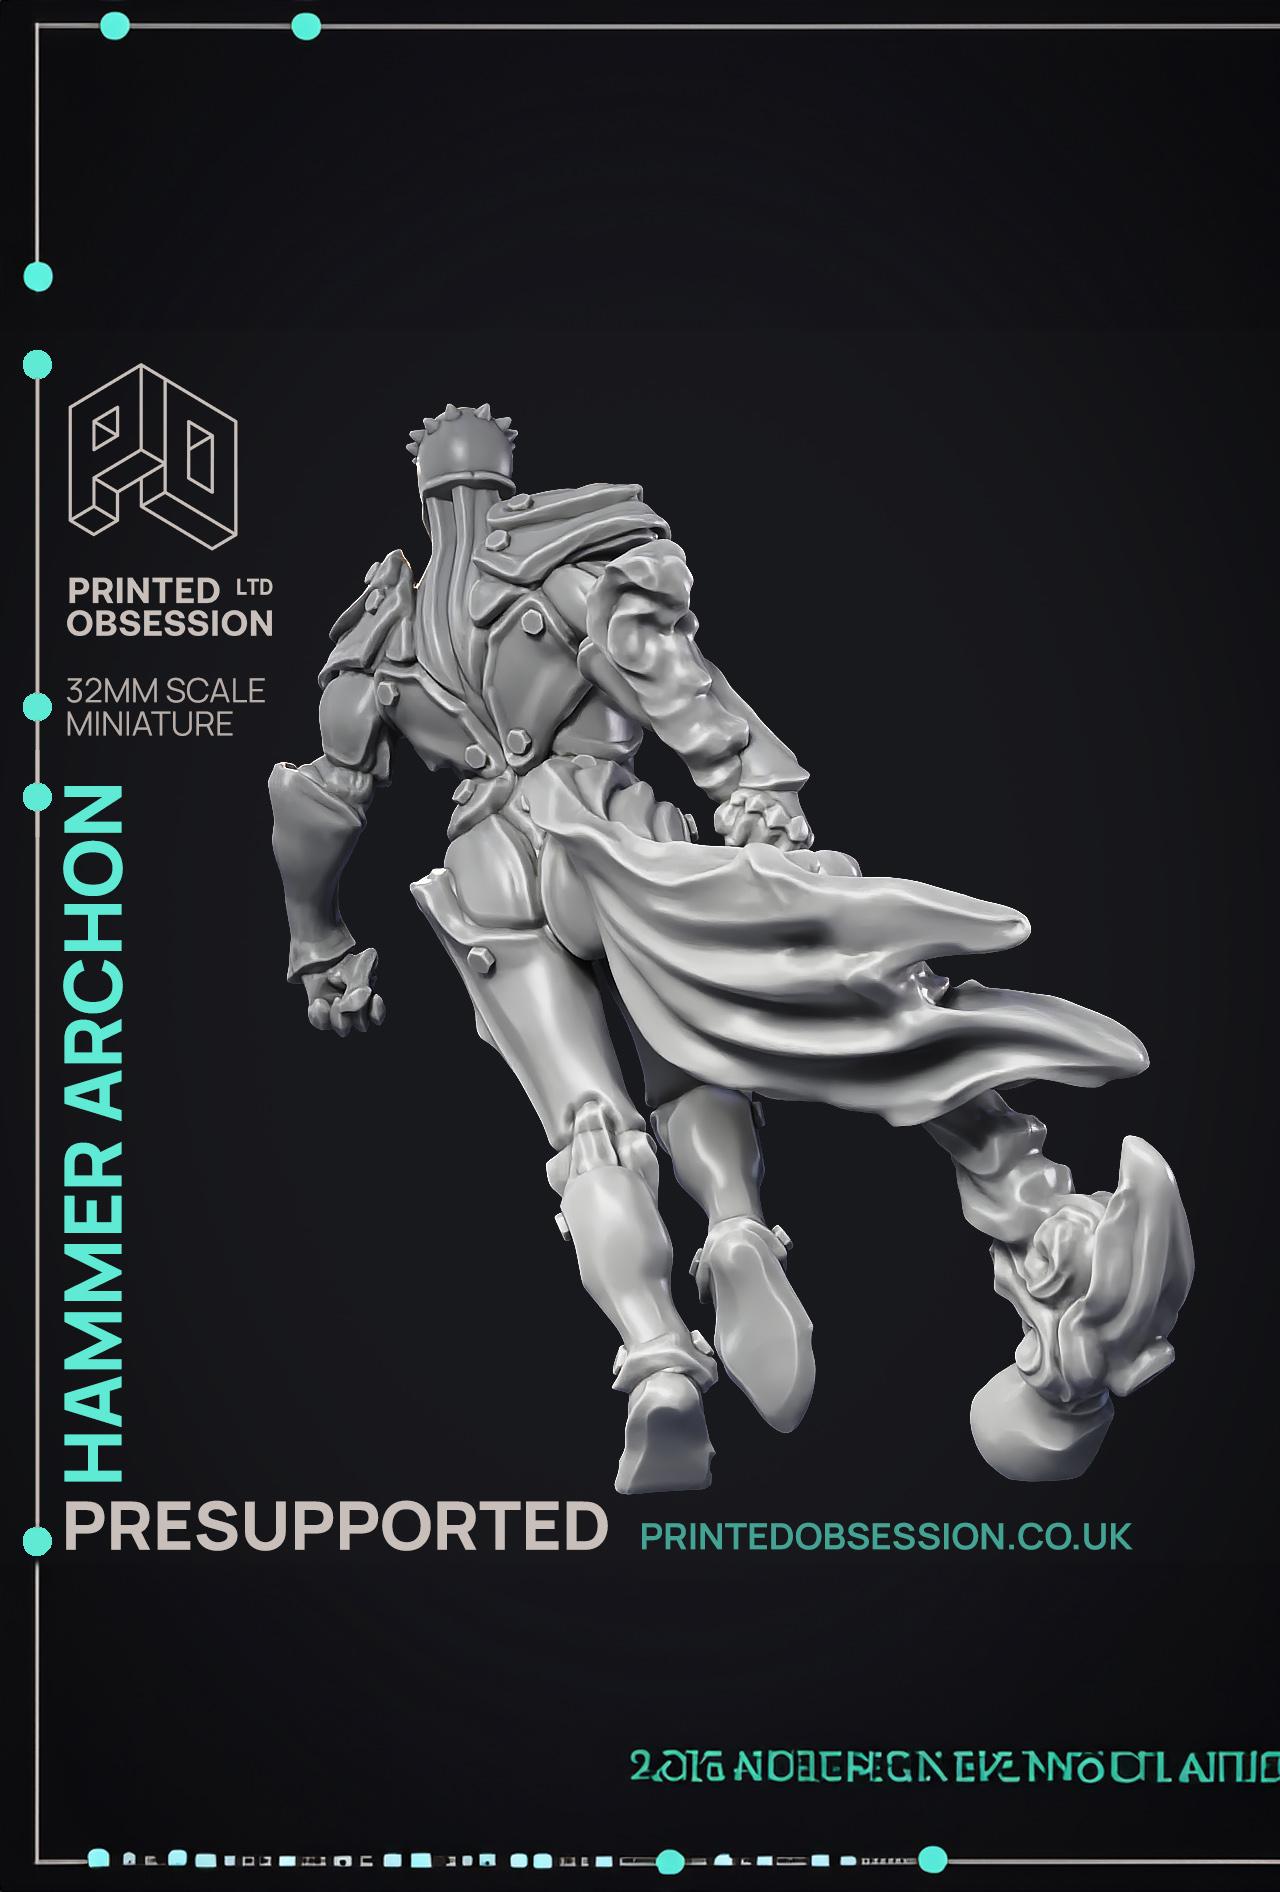 Hammer Archon - Celestial Construct - PRESUPPORTED - Heaven Hath No fury - 32 mm scale 3d model